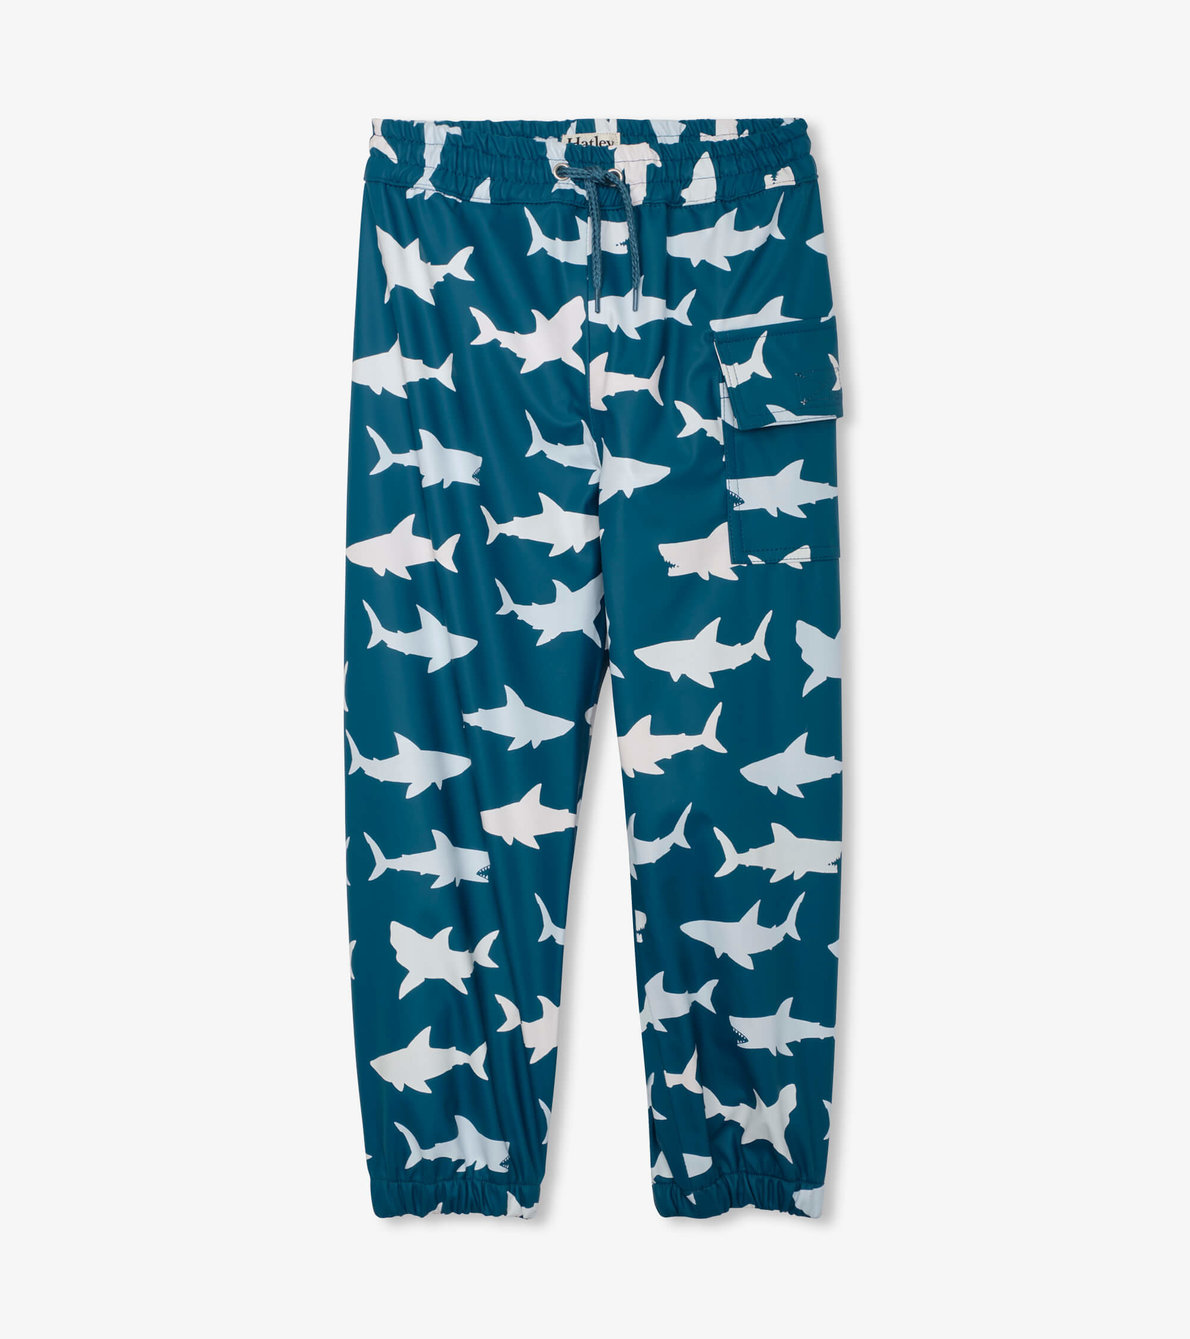 View larger image of Great White Sharks Colour Changing Splash Pants